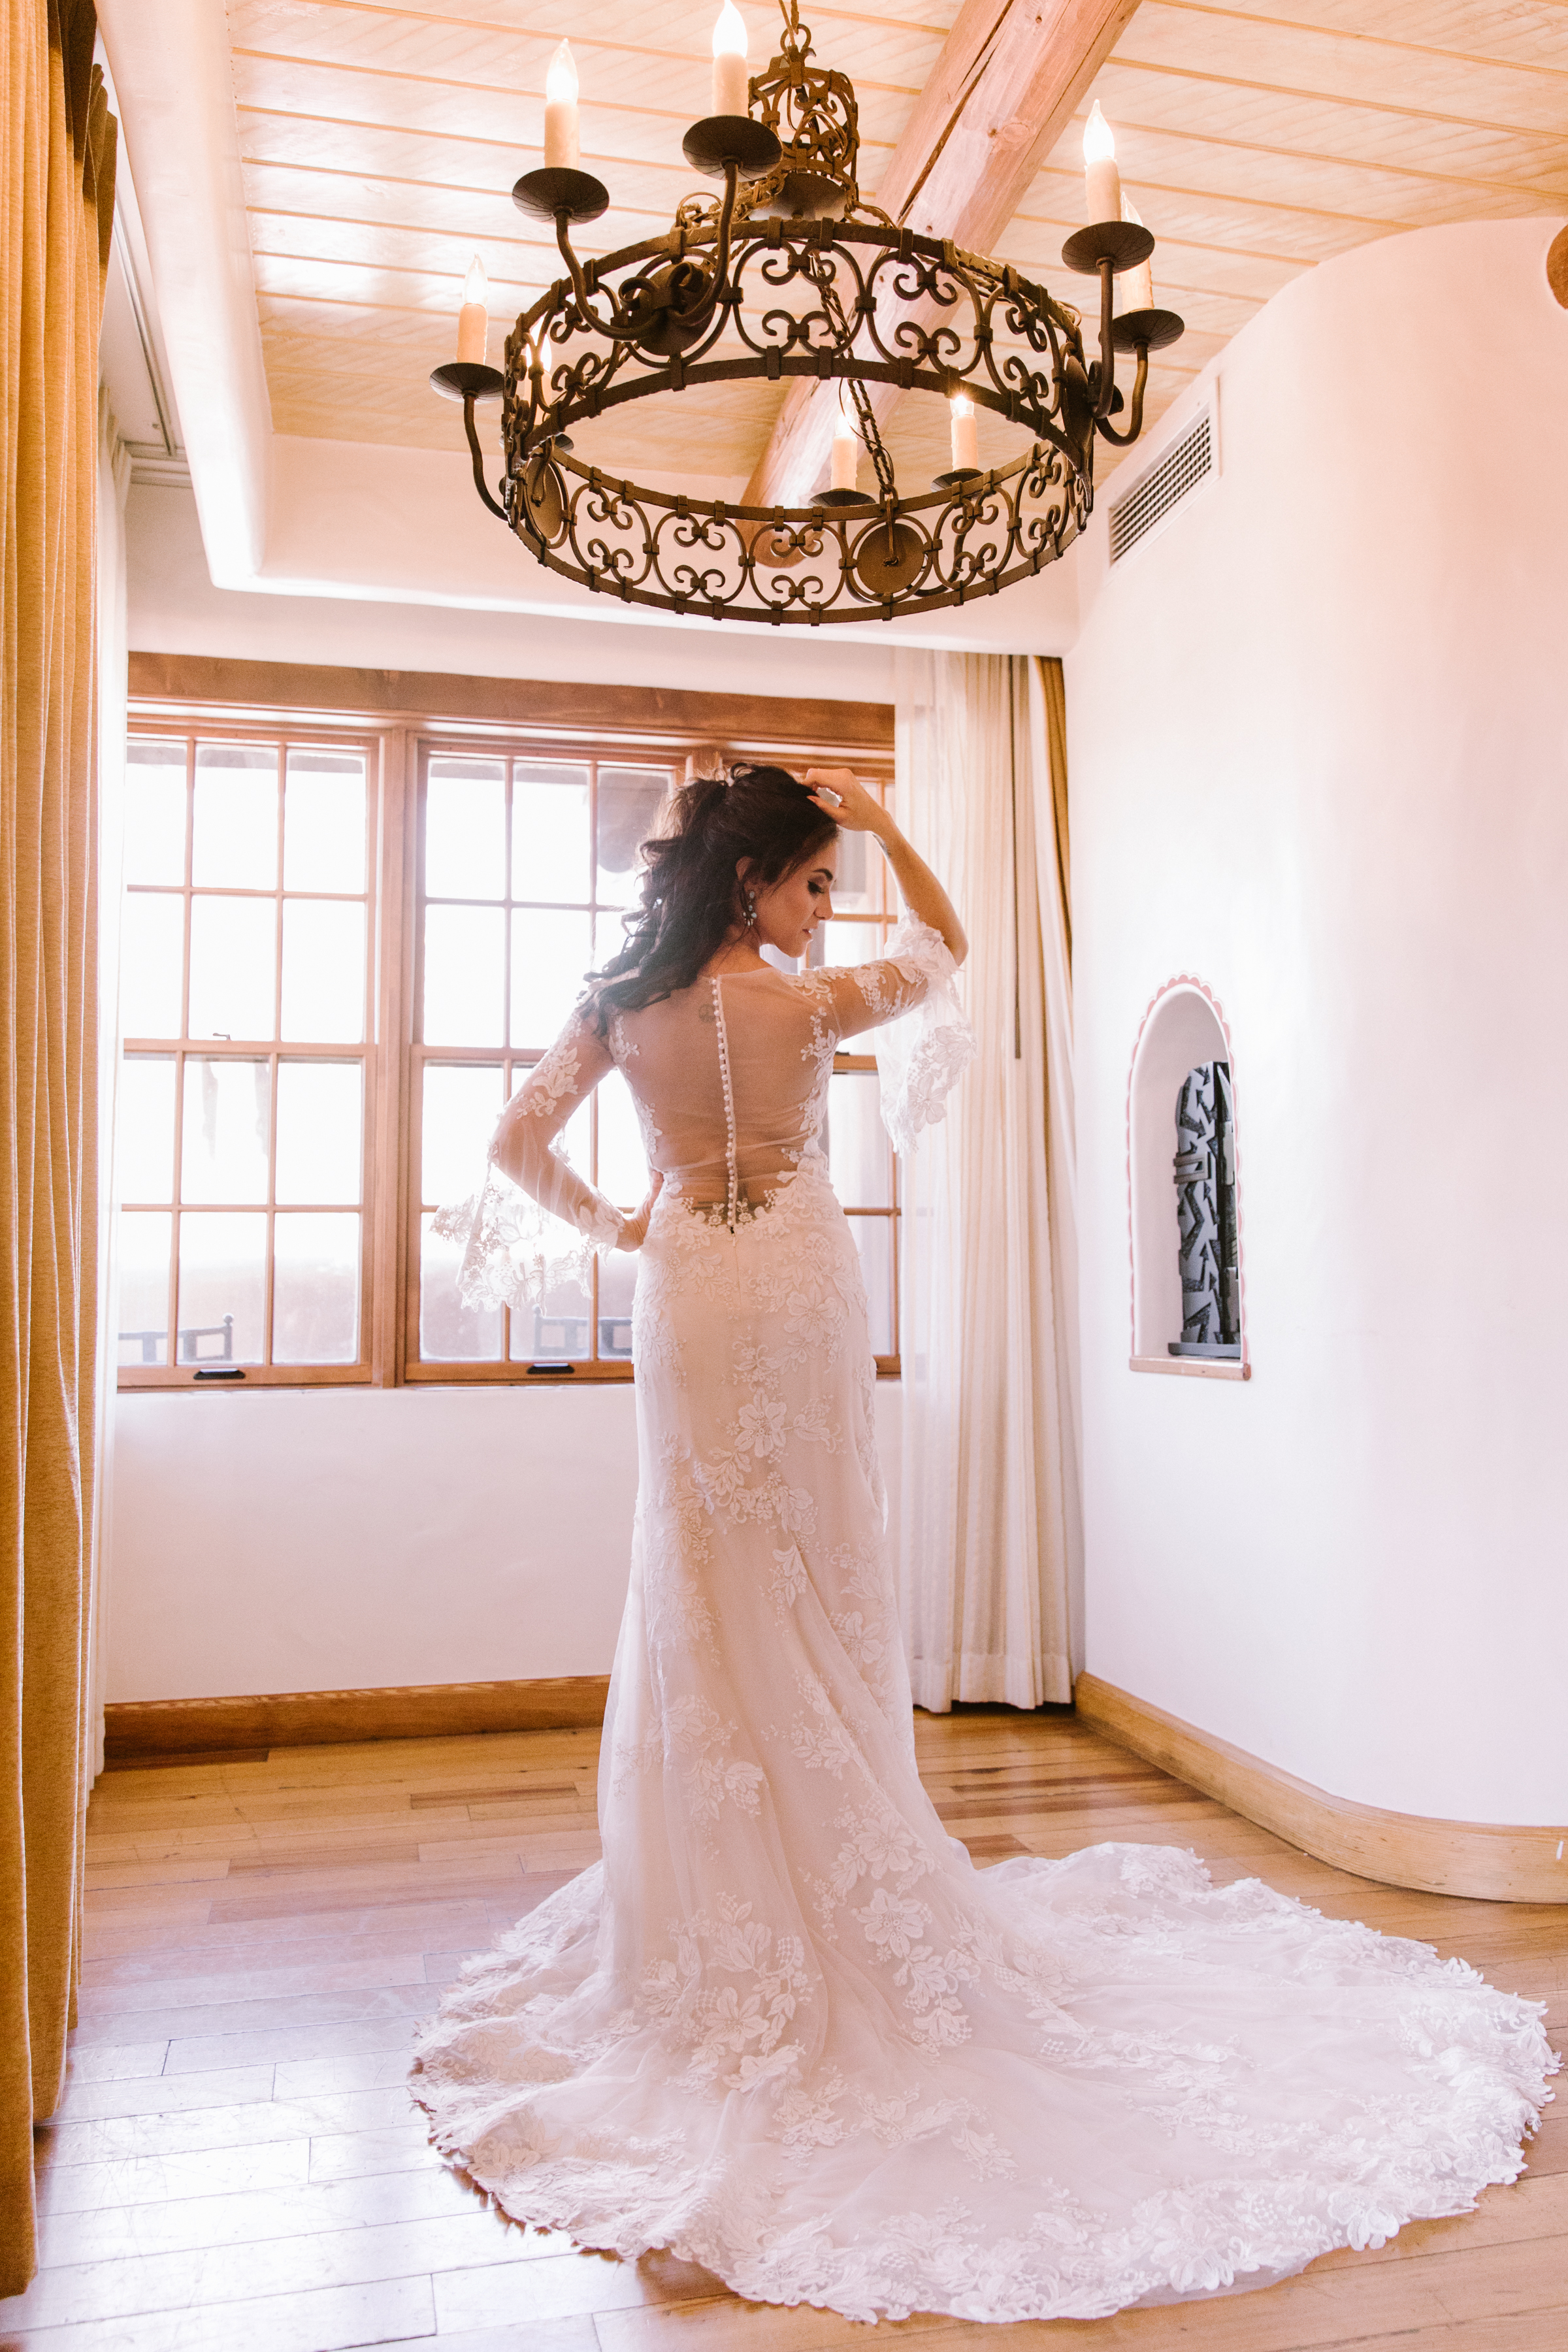 New Mexico wedding Santa Fe planning La Fonda gown suit inspiration design lace photography romantic styled local perfect wedding guide sheer high neck sleeves